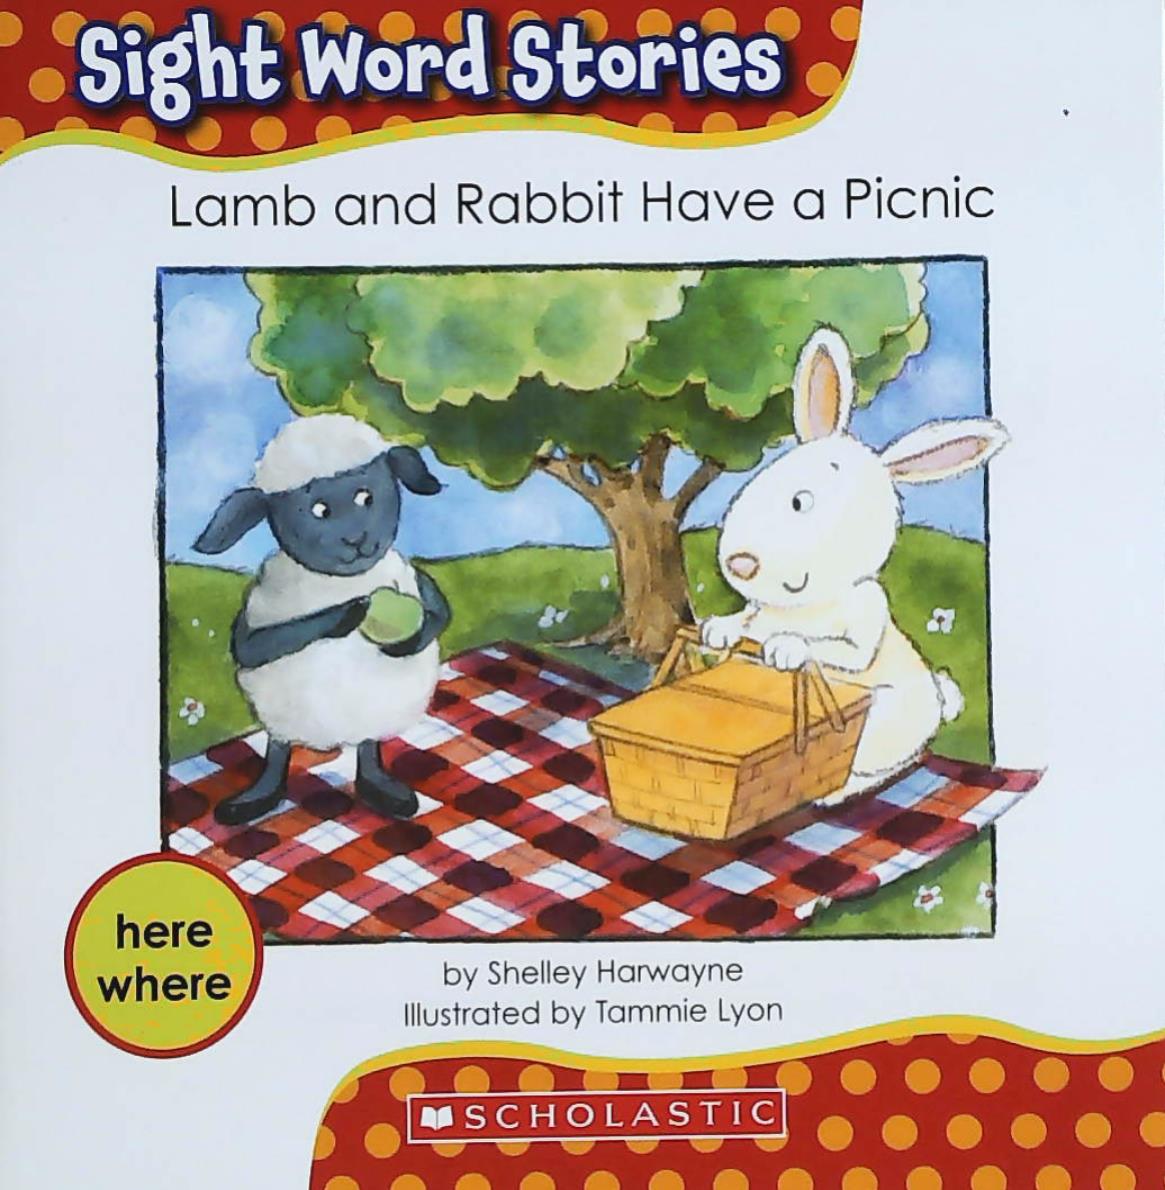 Livre ISBN 0545167833 Sight Word Stories : Lamb and Rabbit Have a Picnic (Shelley Harwayne)